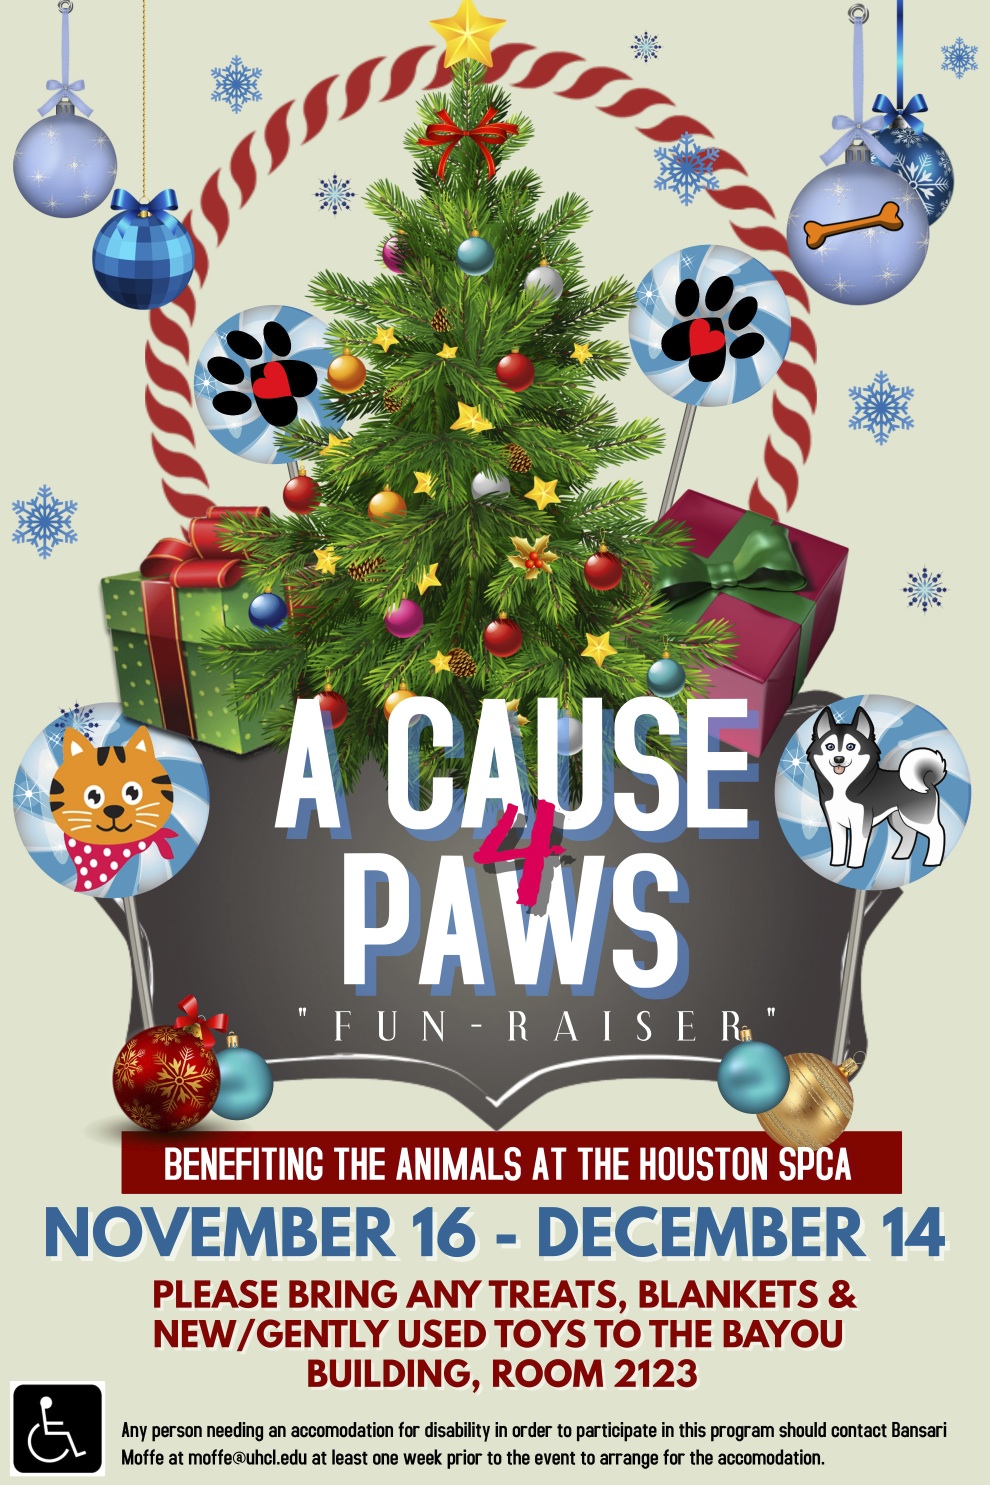 Flyer with information about "A Cause for Paws." Graphic courtesy of Bansari Moffe.